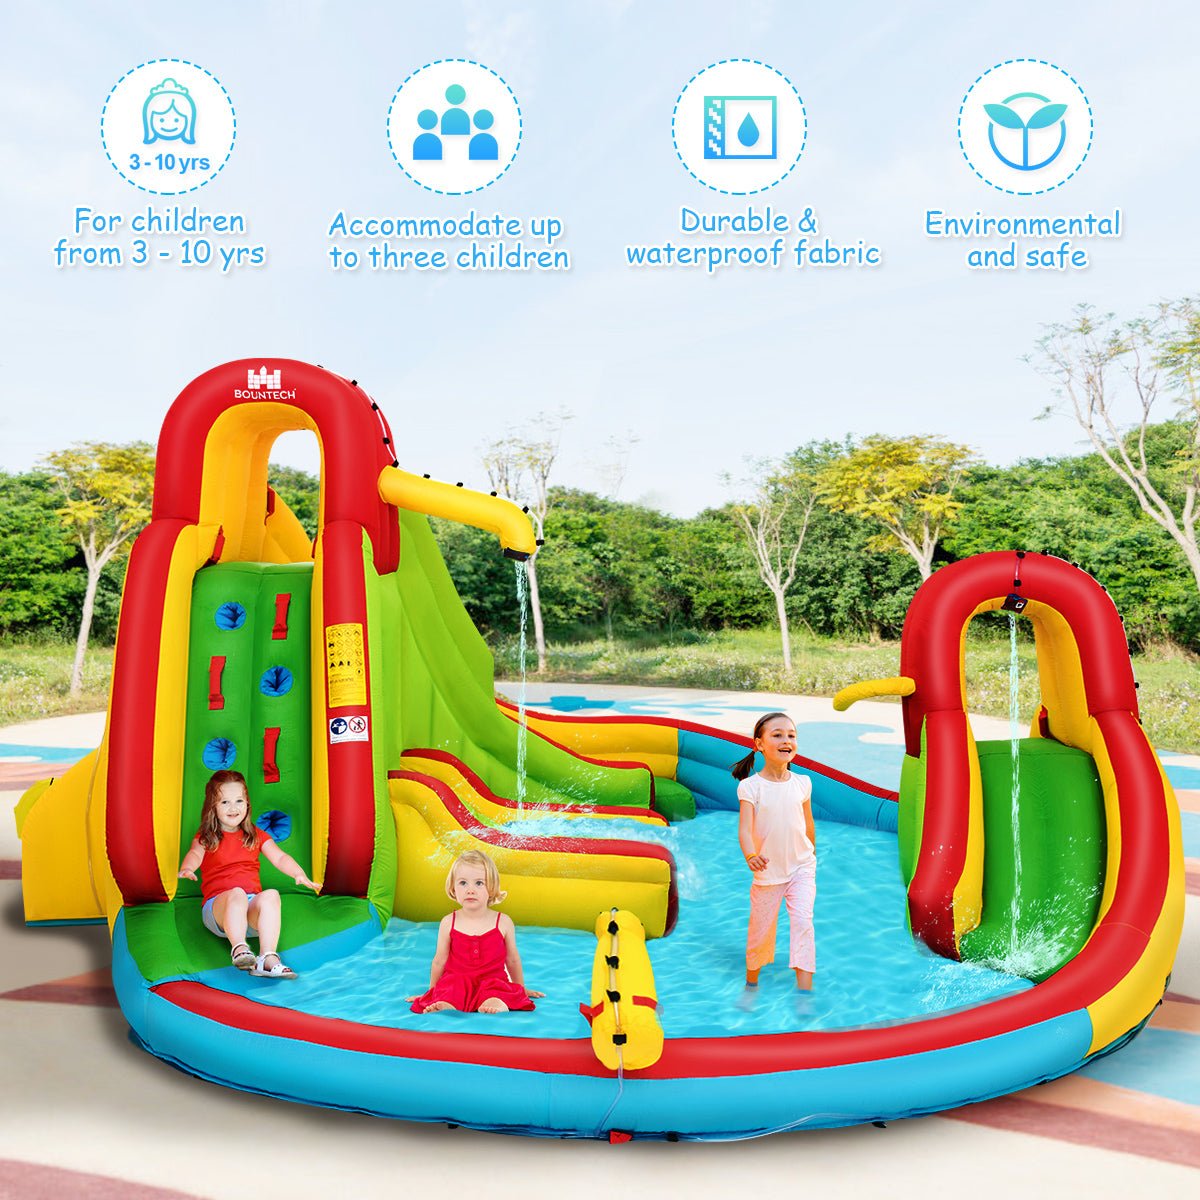 Kids Water Fantasy: Inflatable Water Park Jumping Castle and 680W Electric Blower